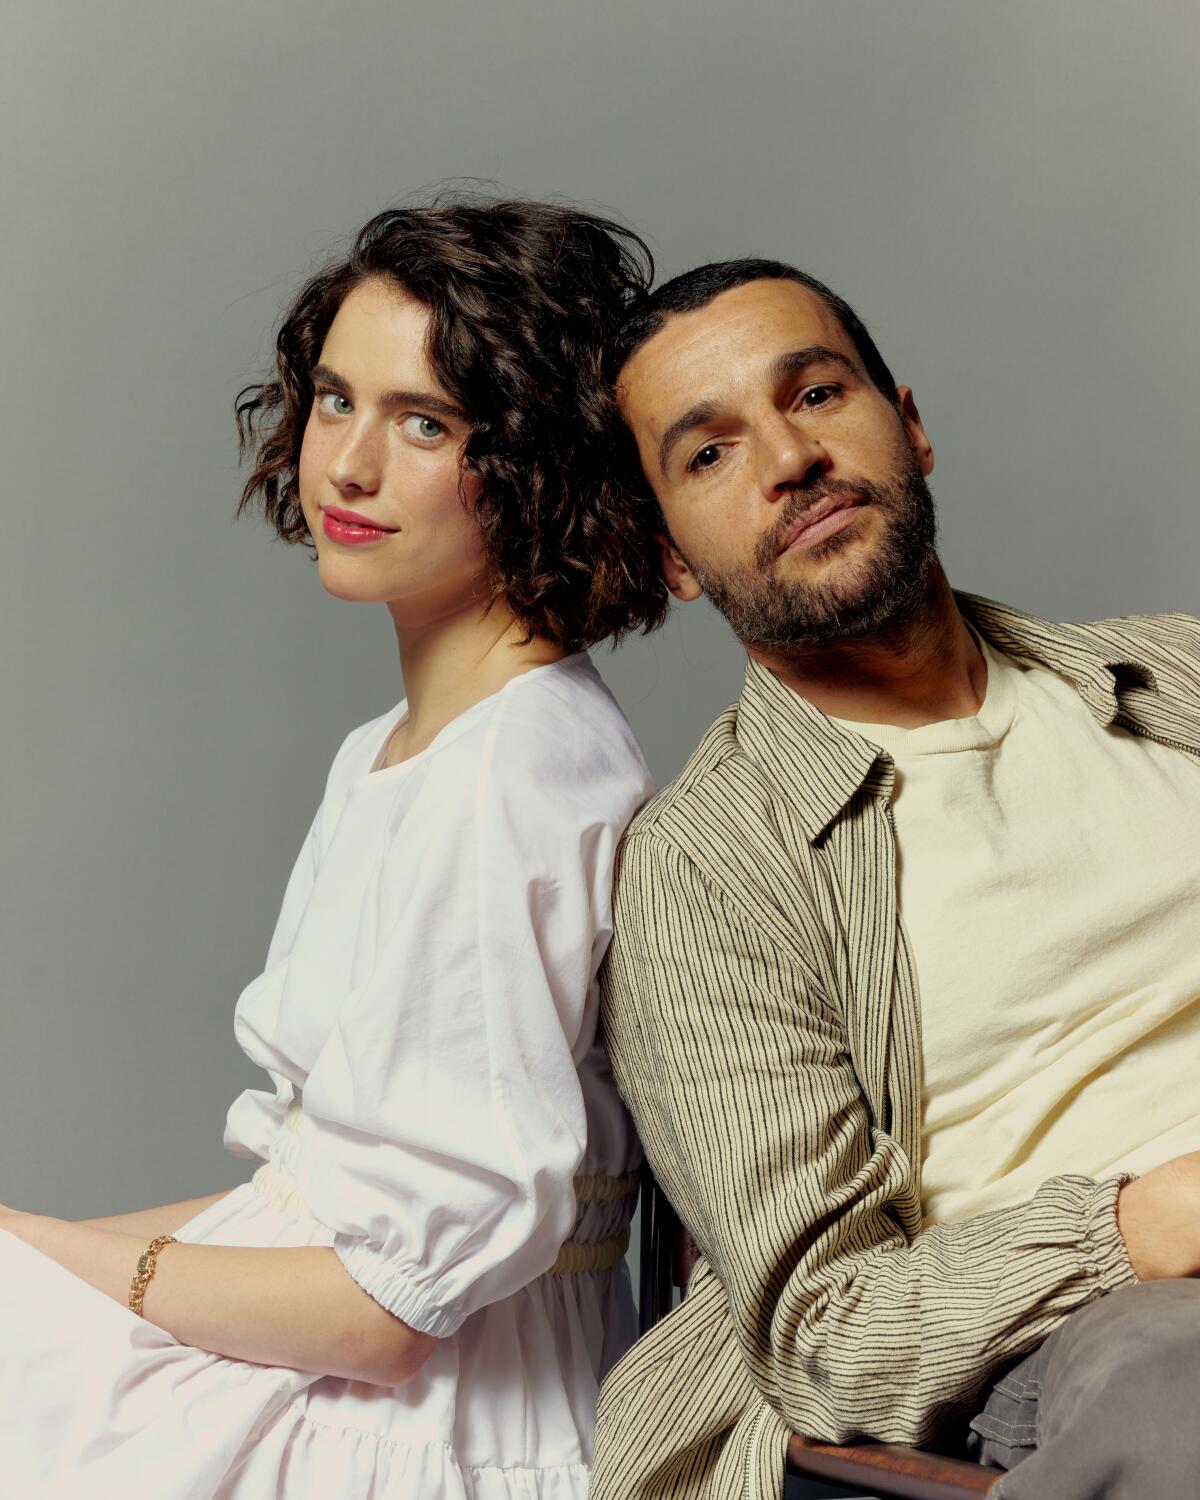 Actors Margaret Qualley and Christopher Abbott pose for a portrait, leaning against each other.